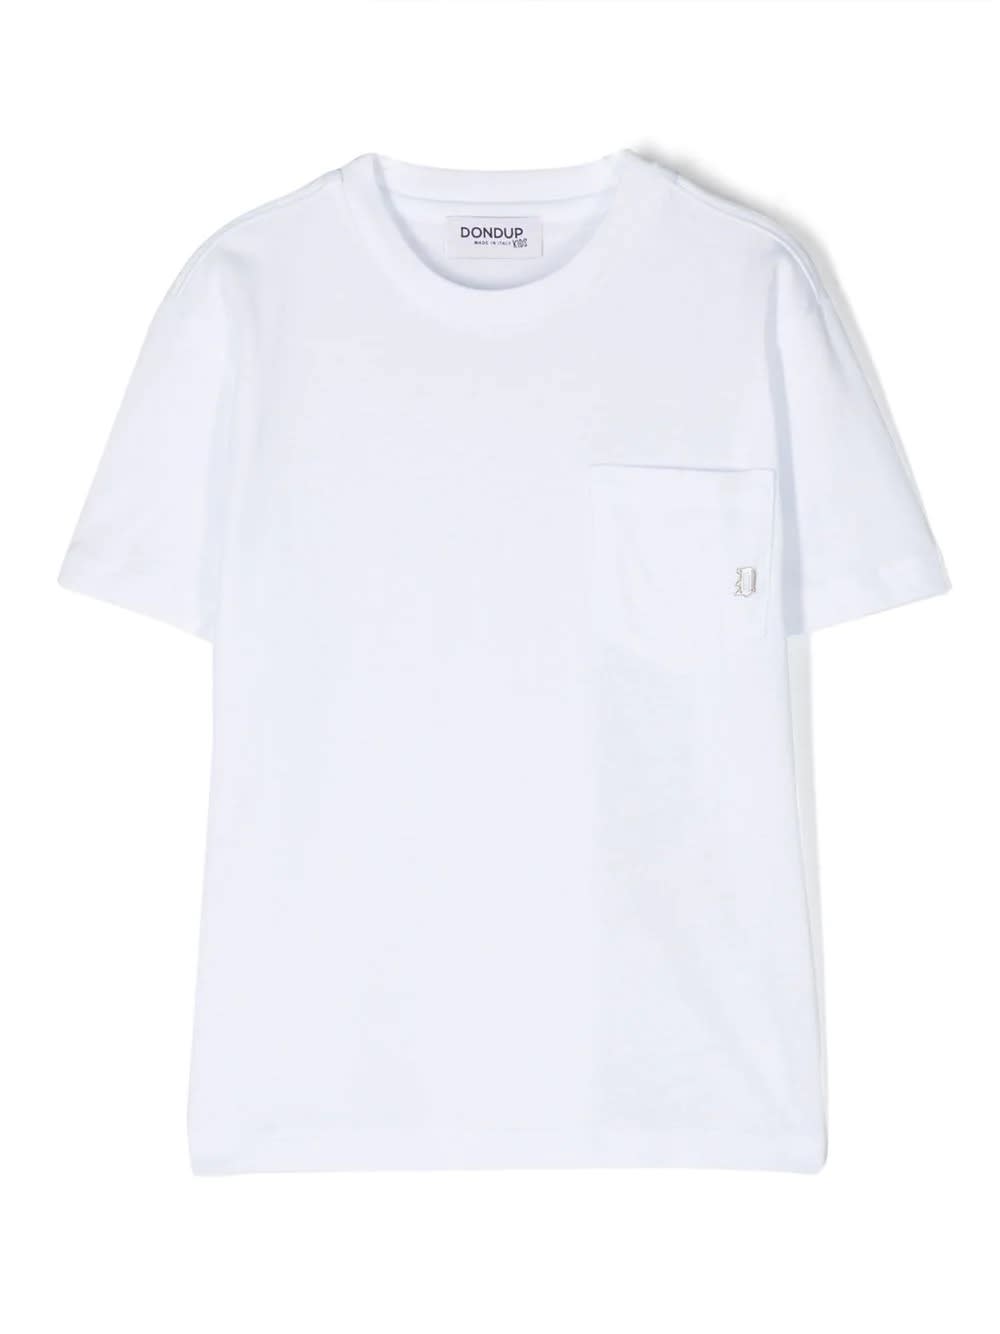 DONDUP WHITE T-SHIRT WITH POCKET